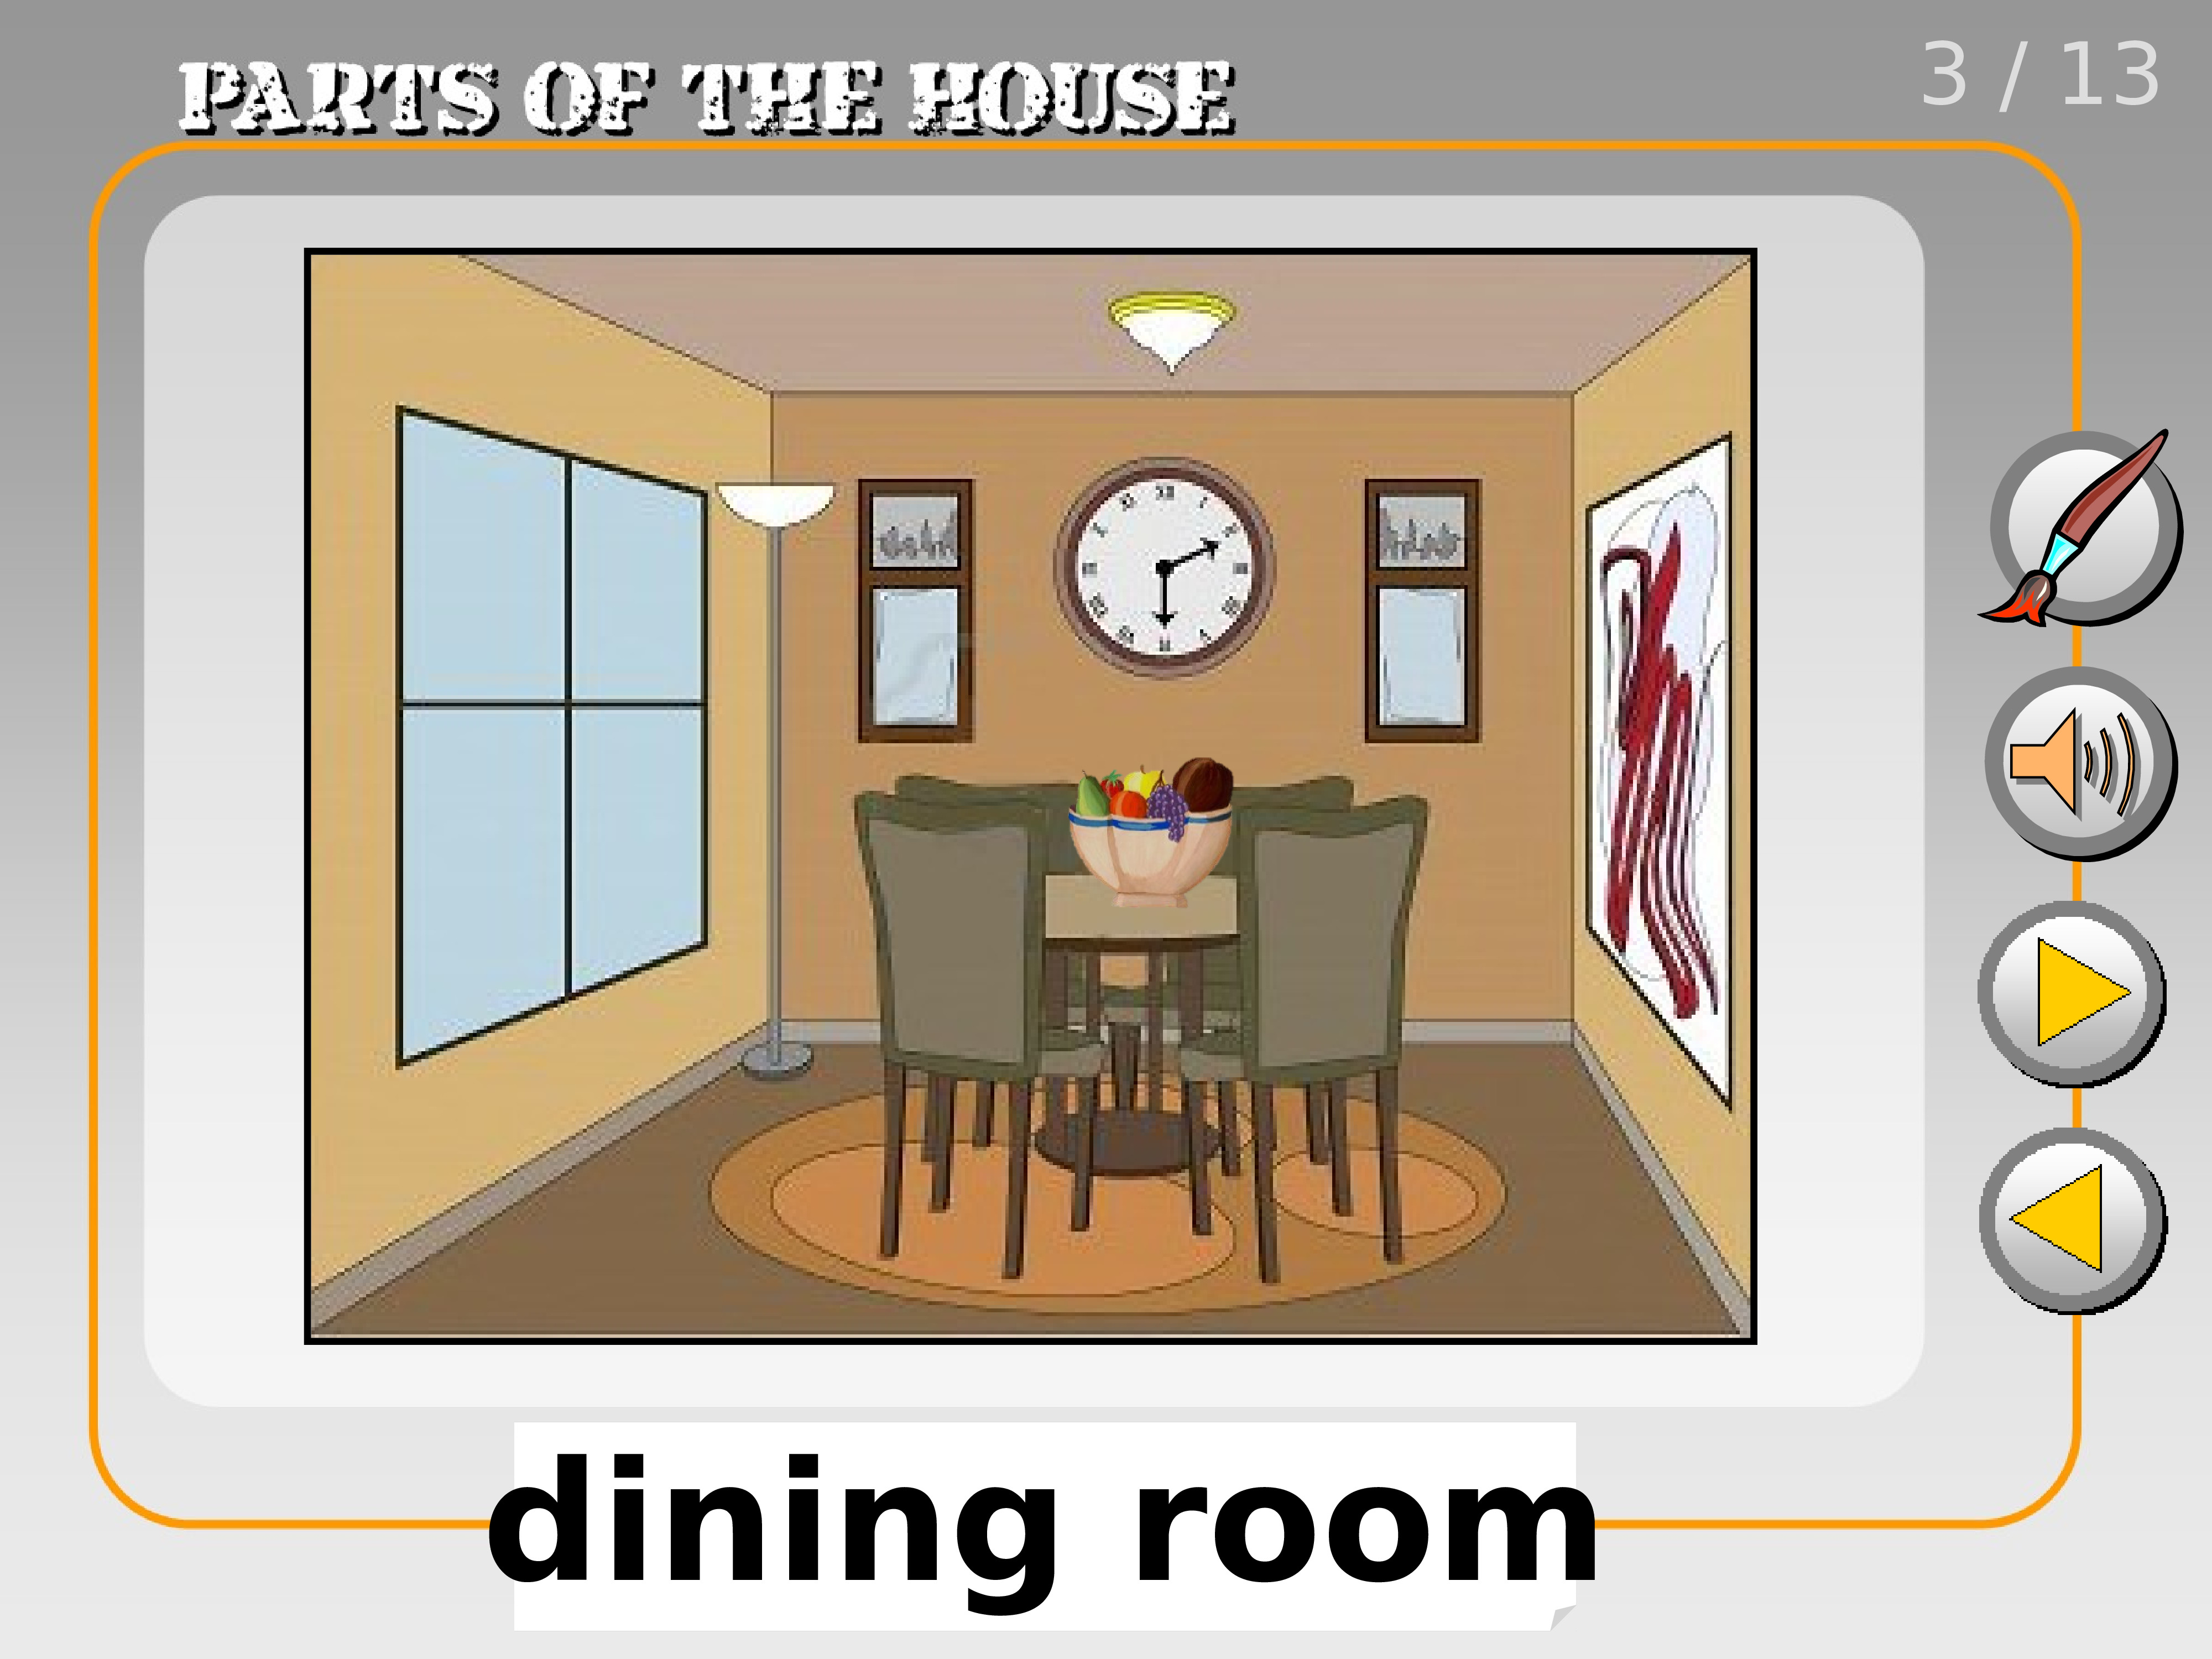 There are four rooms in the house